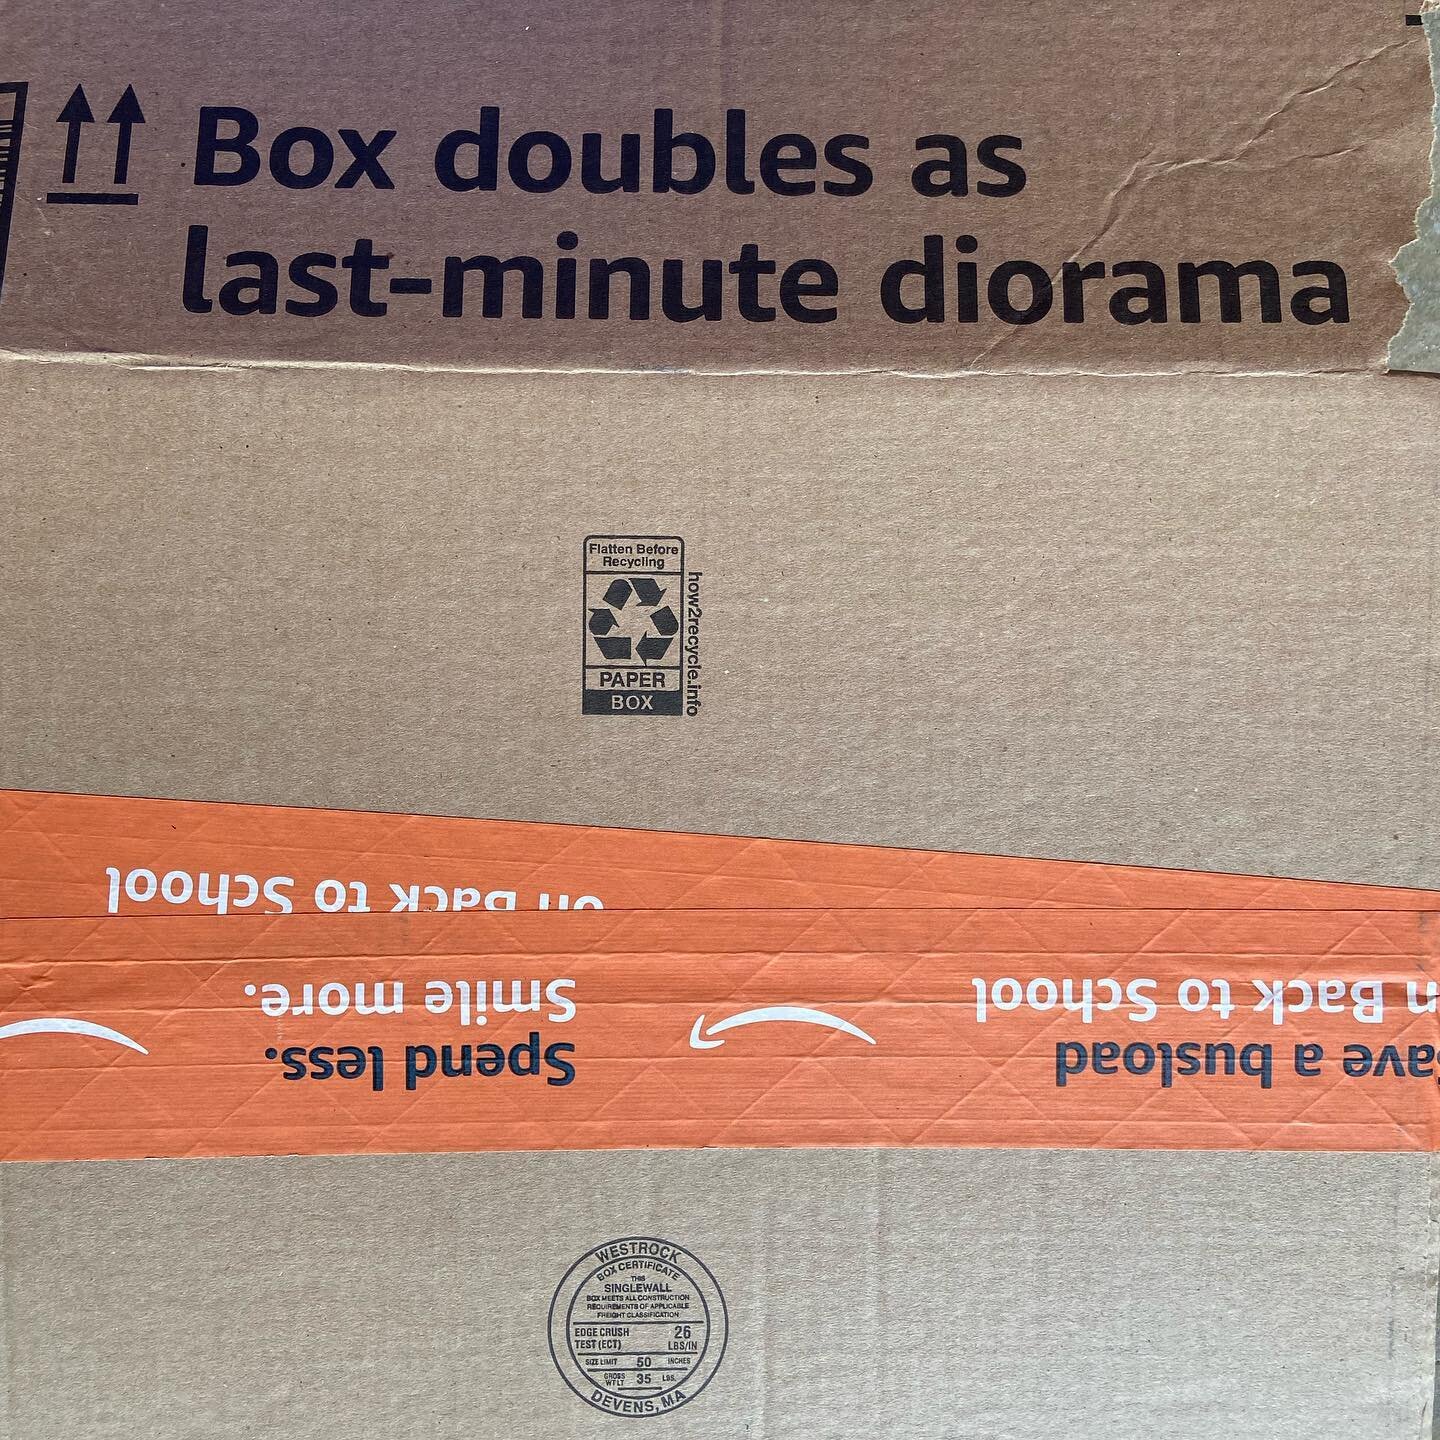 Who knew that boxes were so handy?
#diorama #box